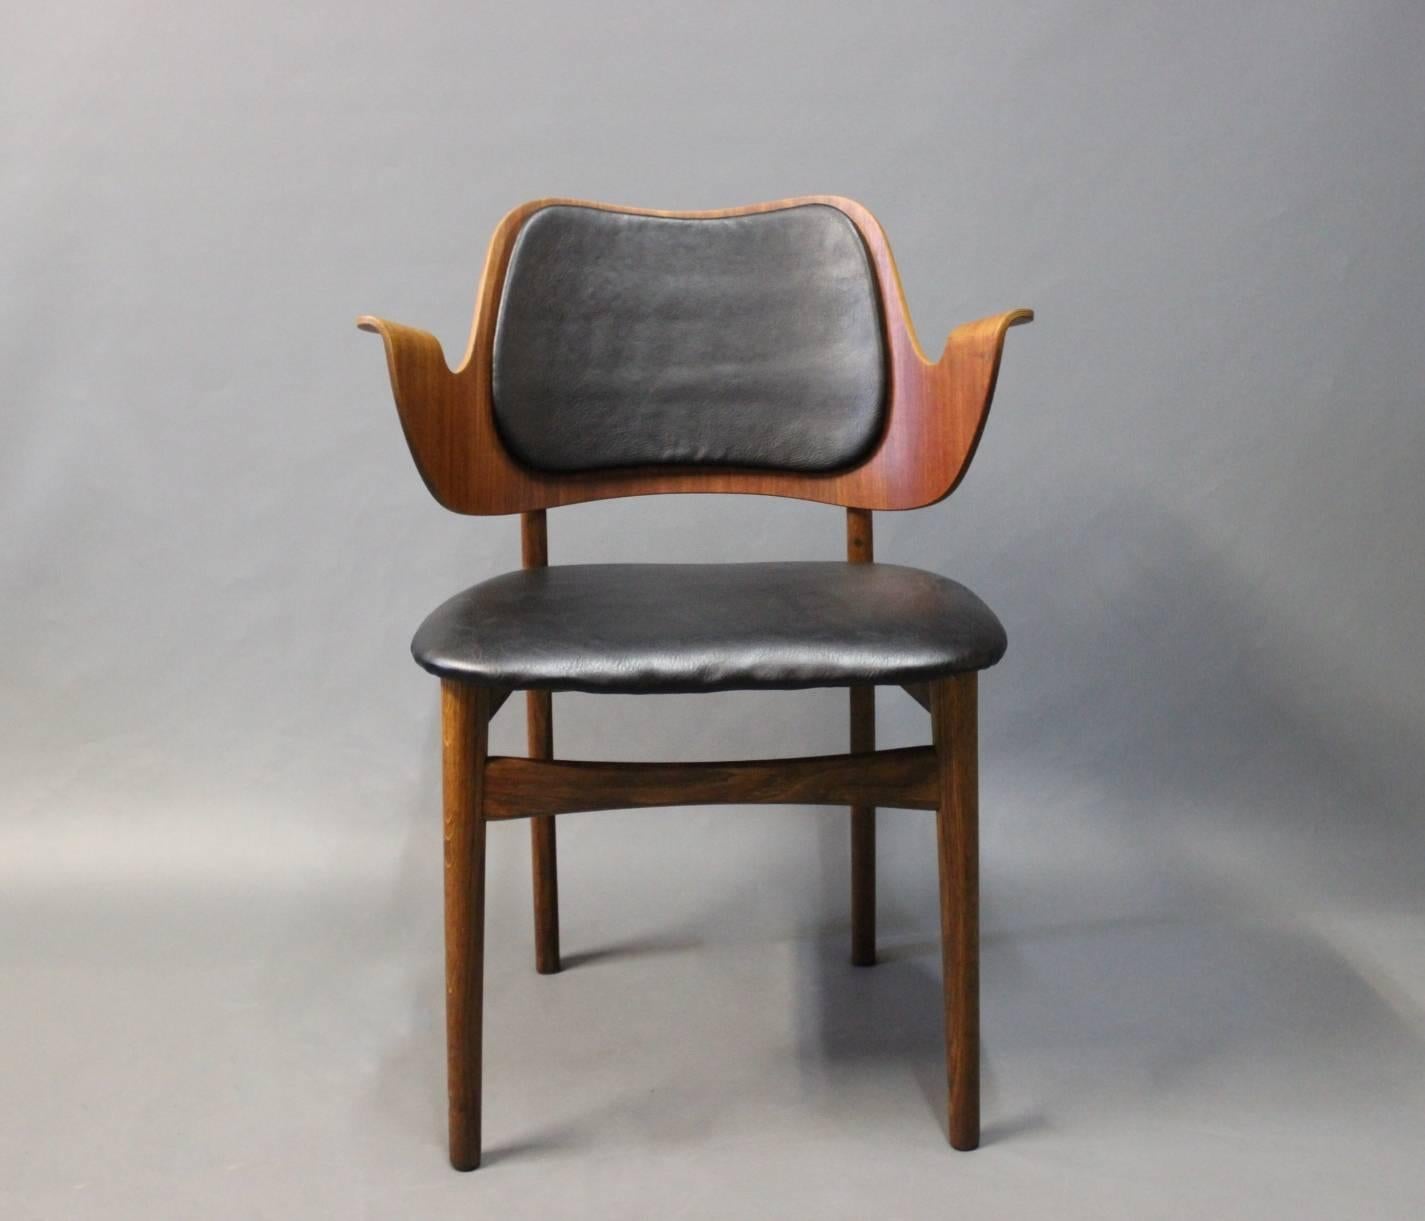 A pair of armchairs designed by Arne Hovmand Olsen in teak and upholstered in black Classic leather of Danish Design from the 1960s.